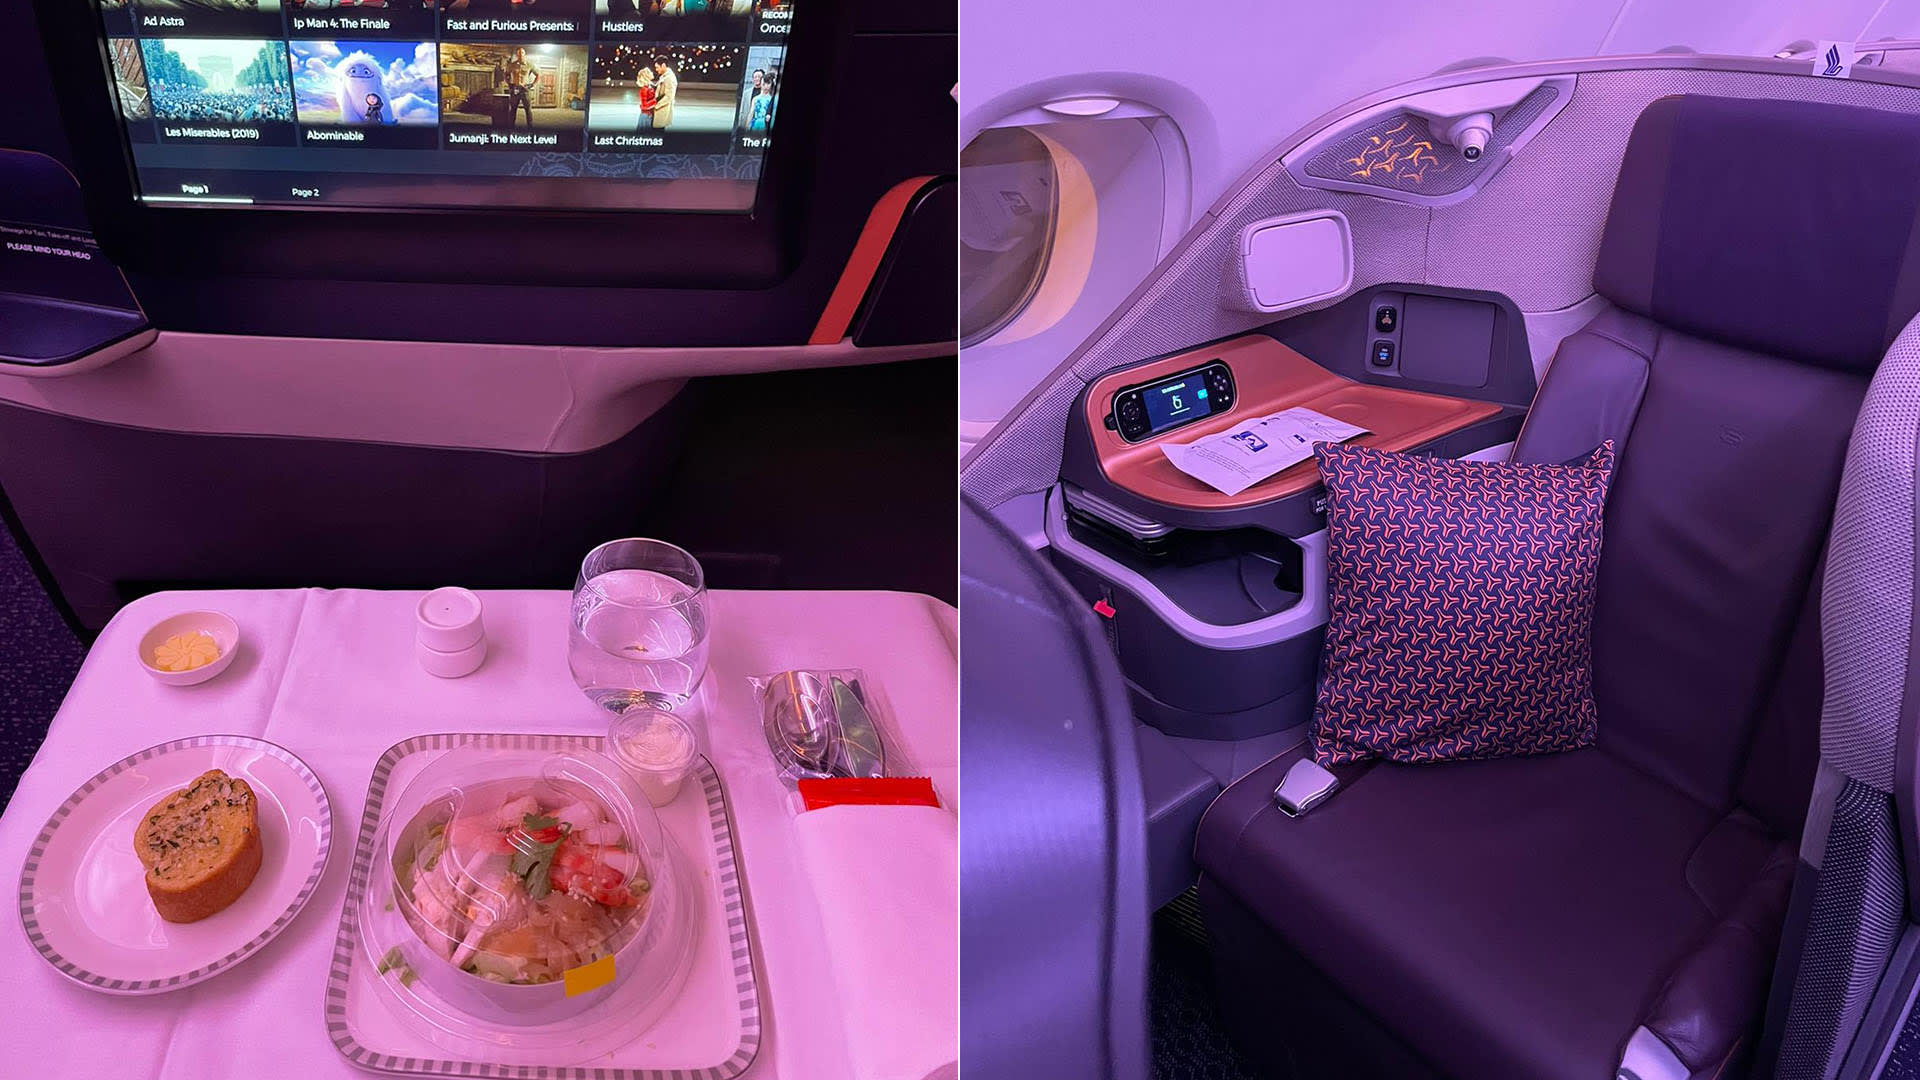 We Tried SIA’s A380 Restaurant's $321 Business Class Dining Experience. Is It Worth The Price Tag?